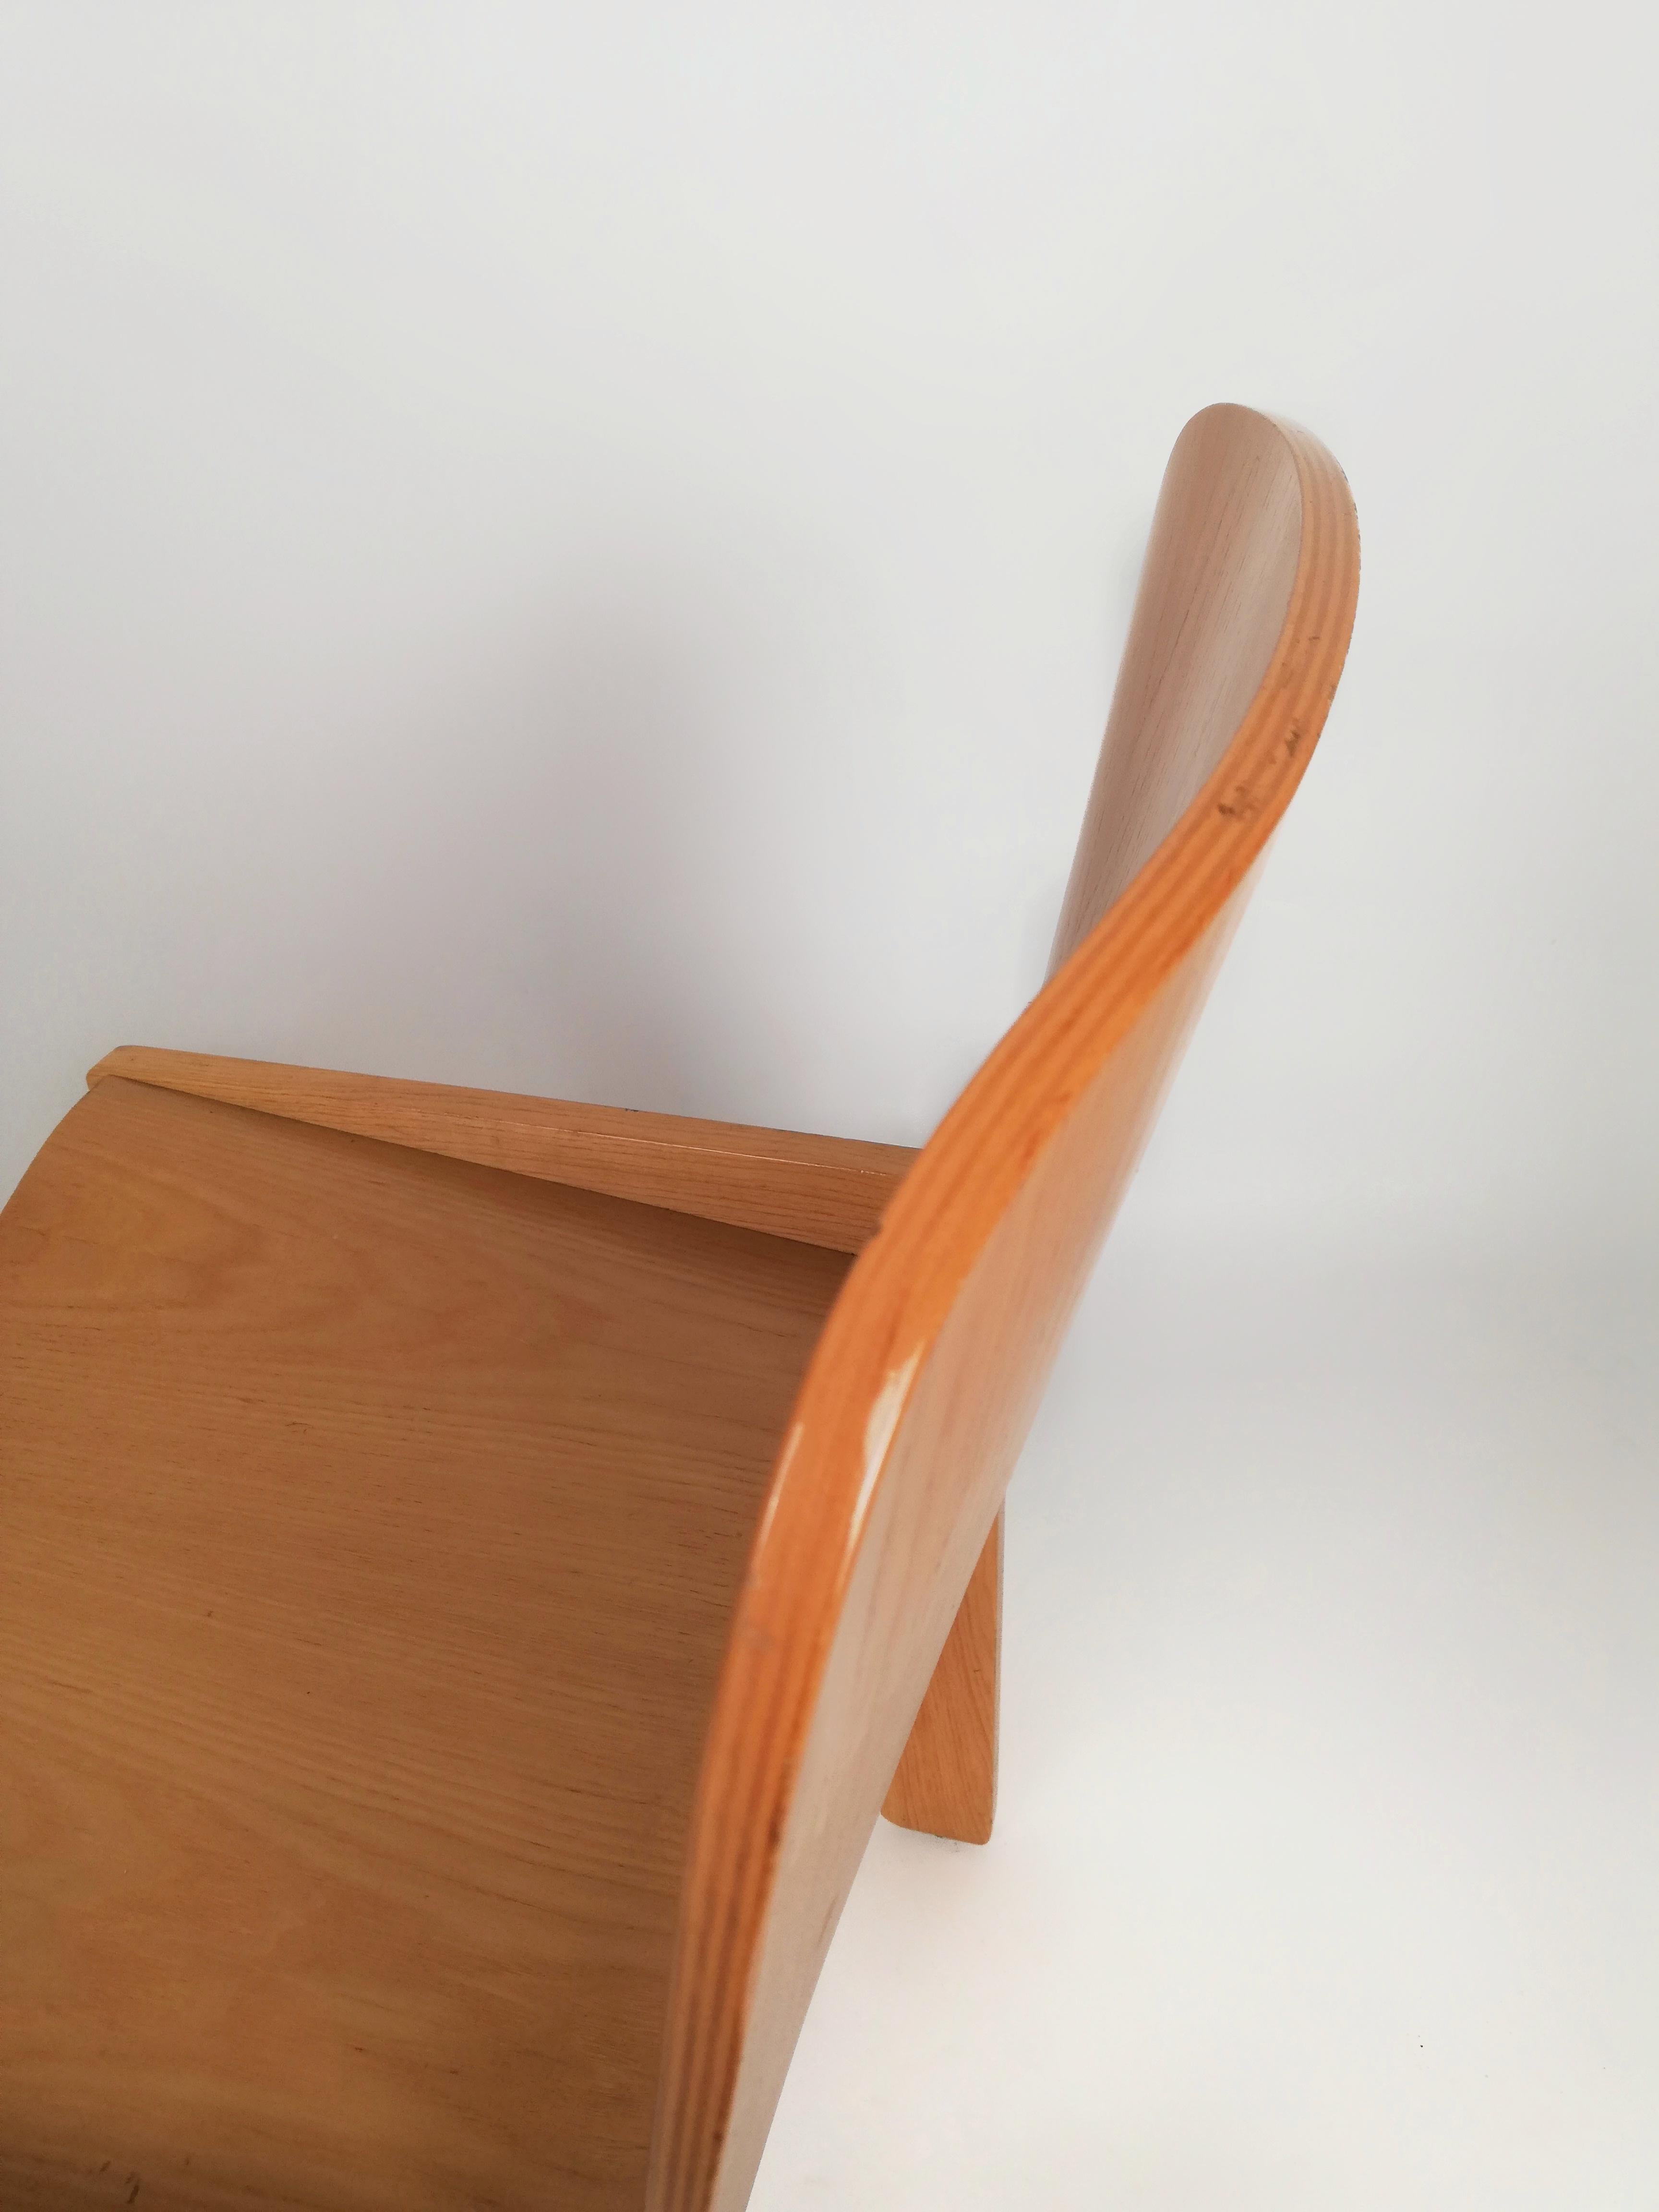 Late 20th Century 6 Curved Plywood Dining Chairs by Molteni in the style of Scarpa, Italy, 1970s For Sale